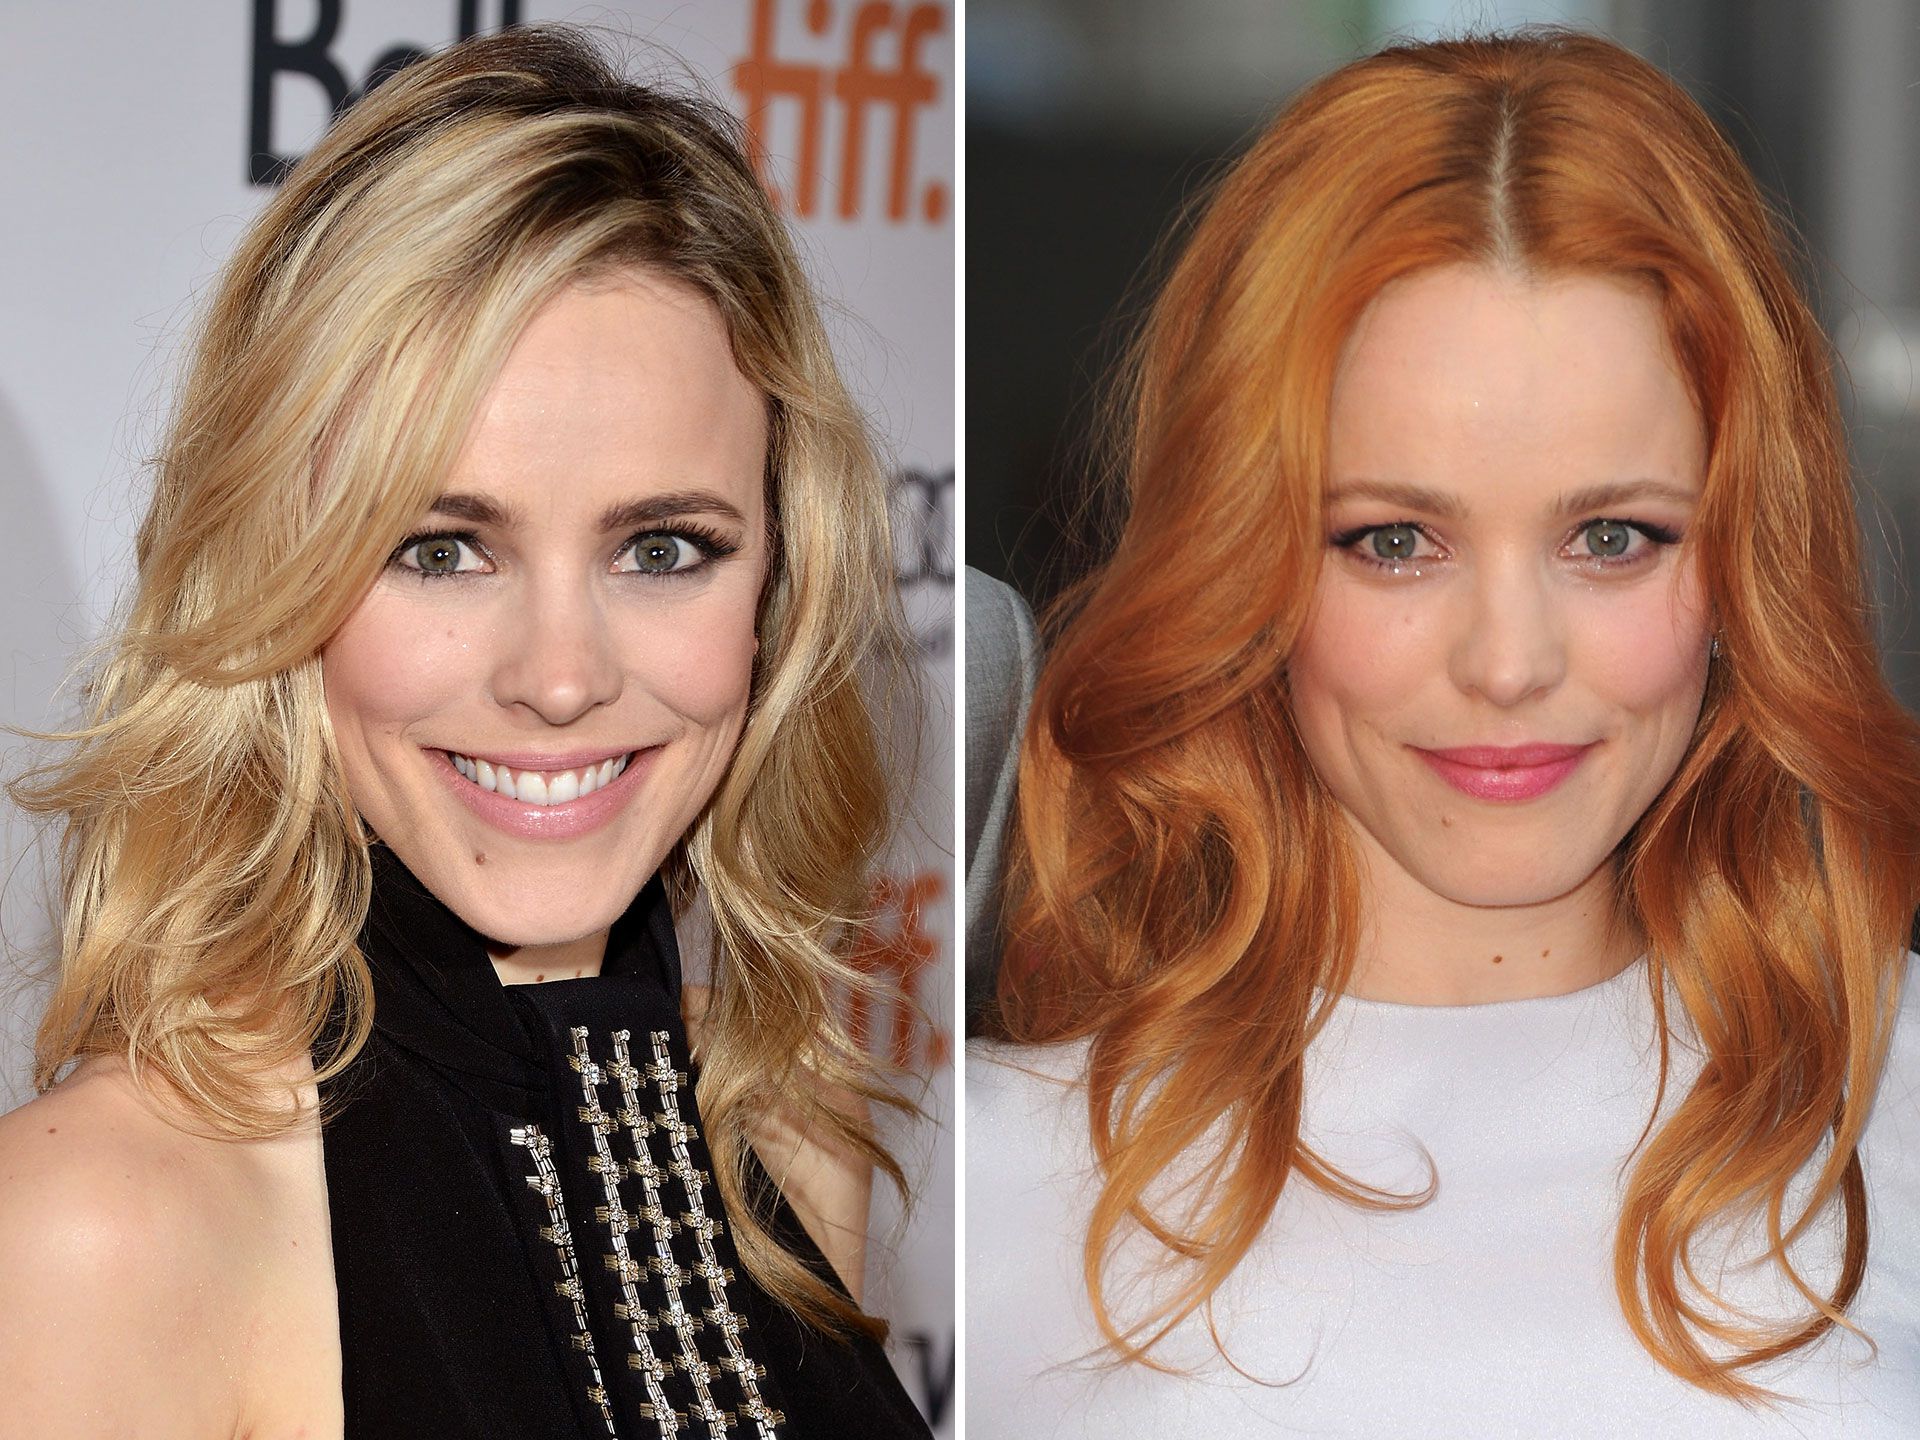 Celebs Who Have Had Blonde and Dark Hair - Blonde and Brunette